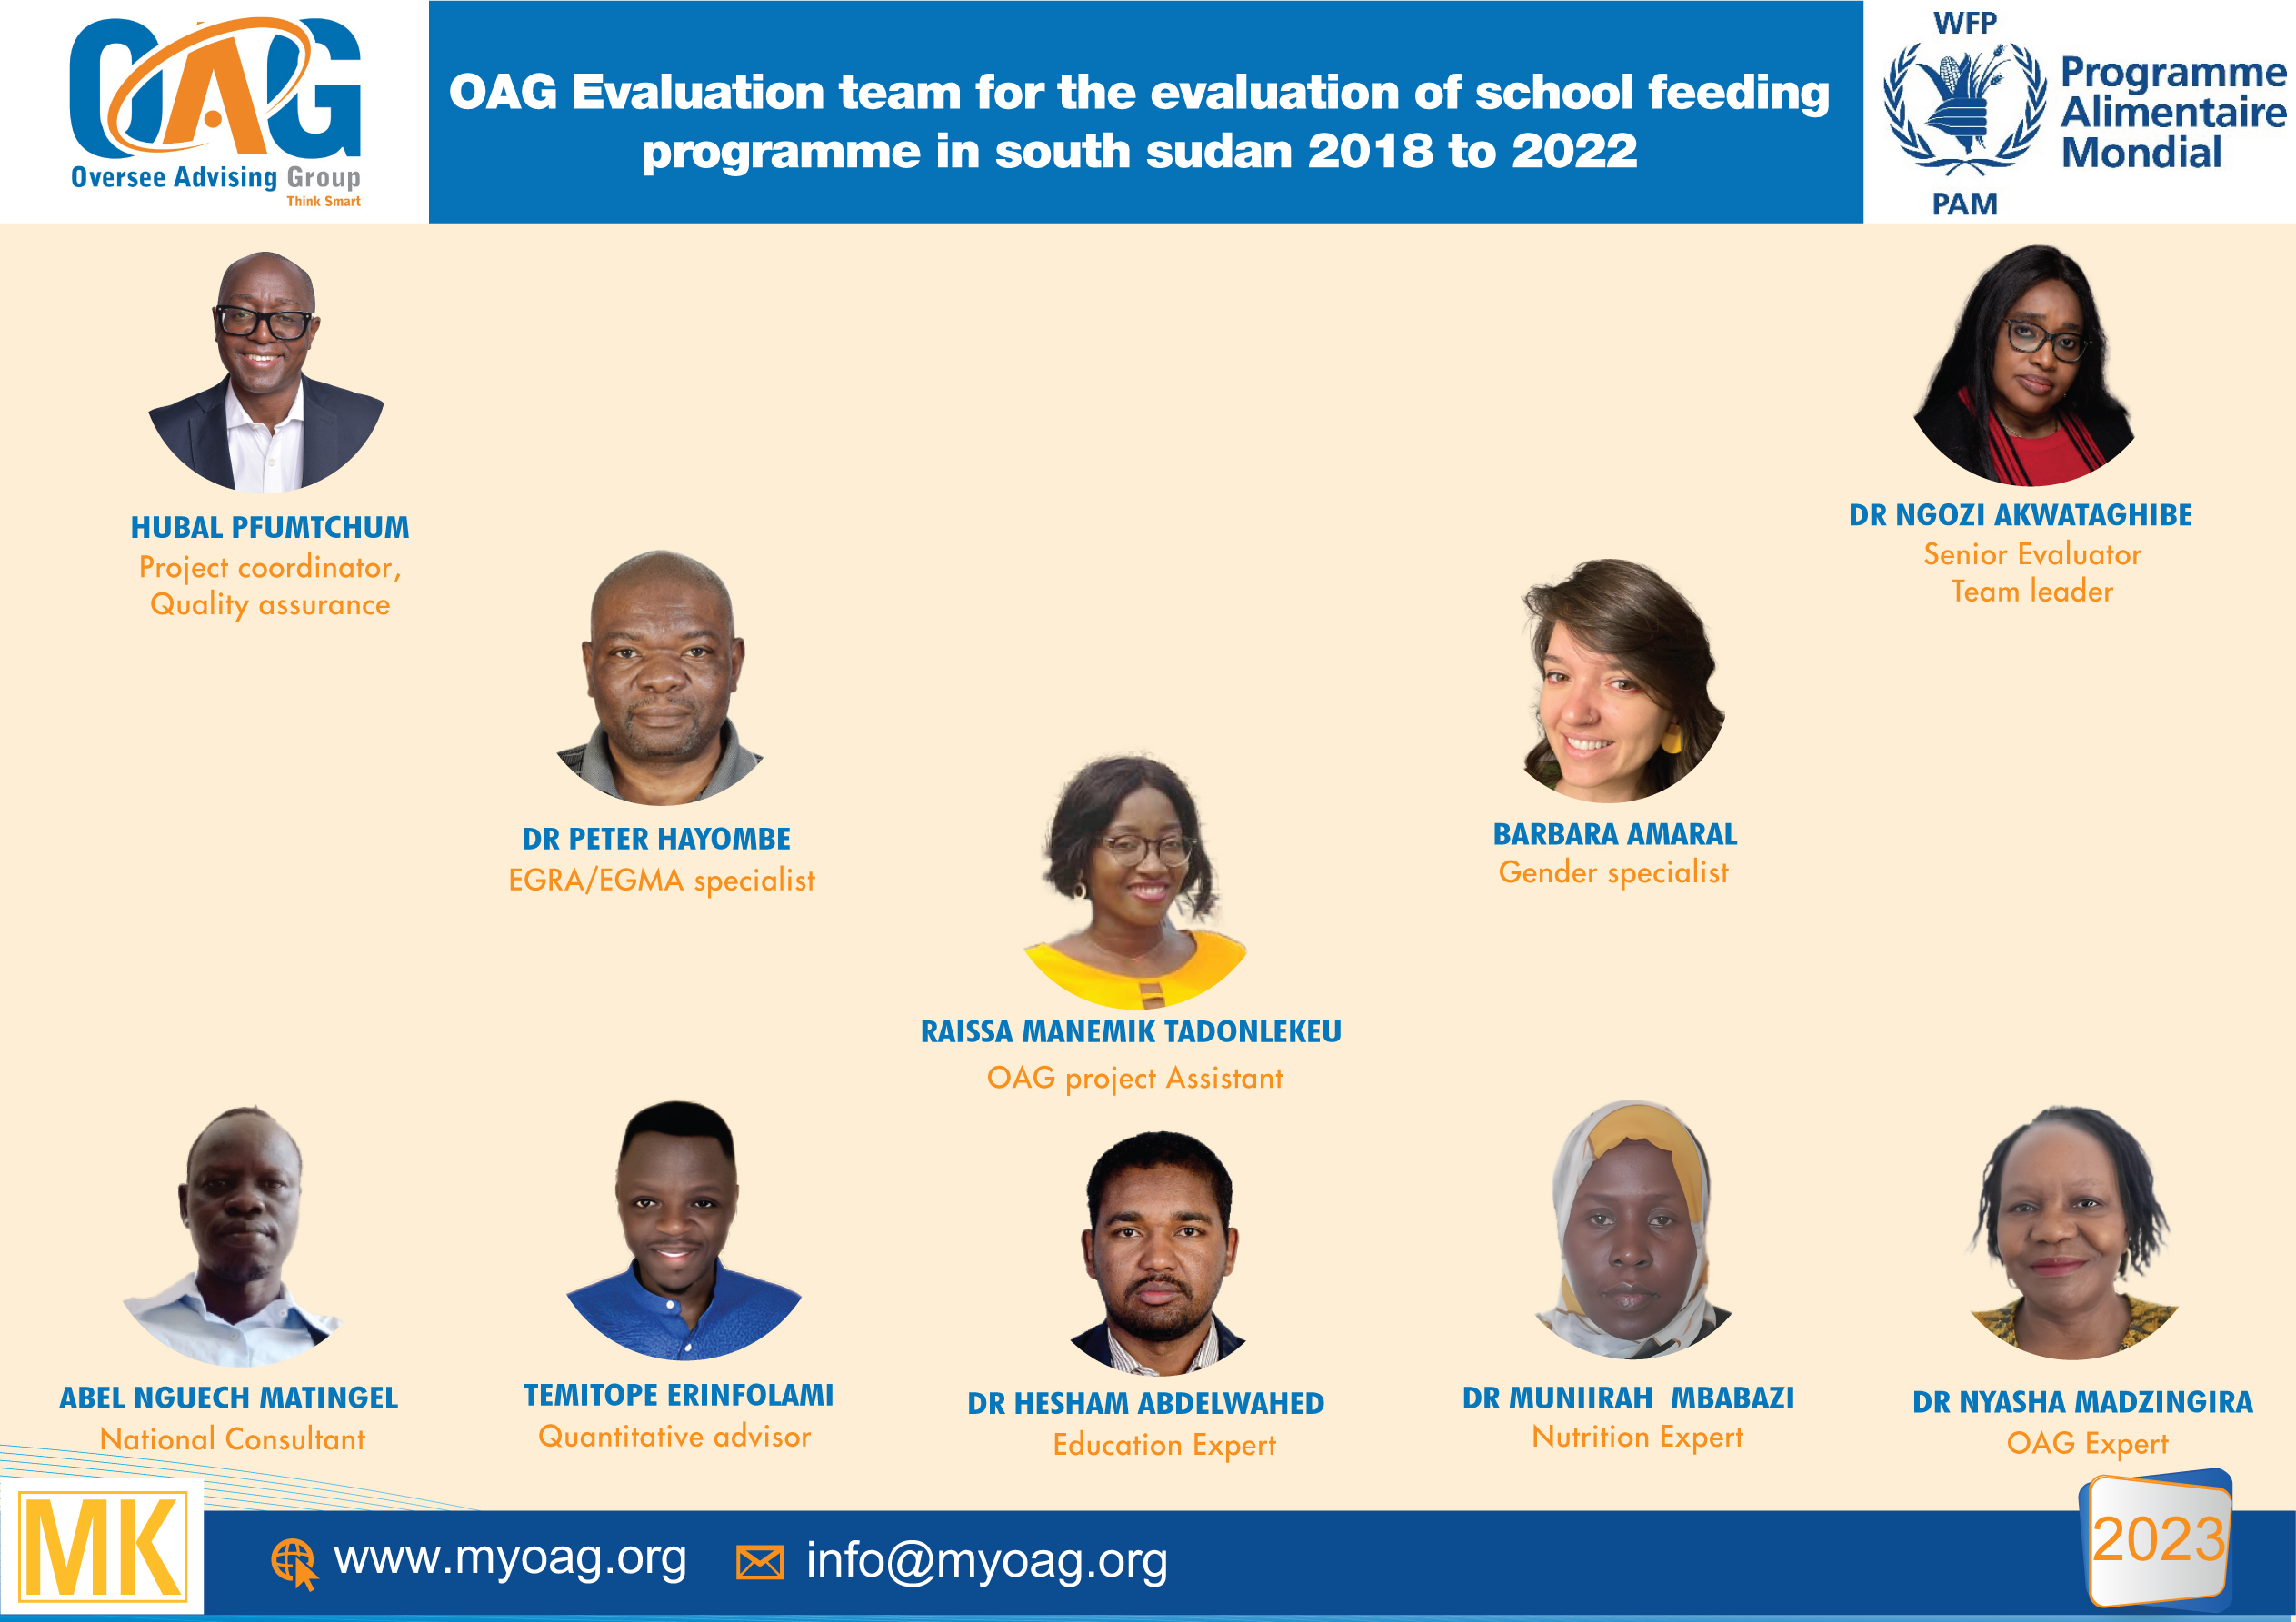 OAG Evaluation team for the evaluation of school feeding programme in south sudan 2018 to 2022